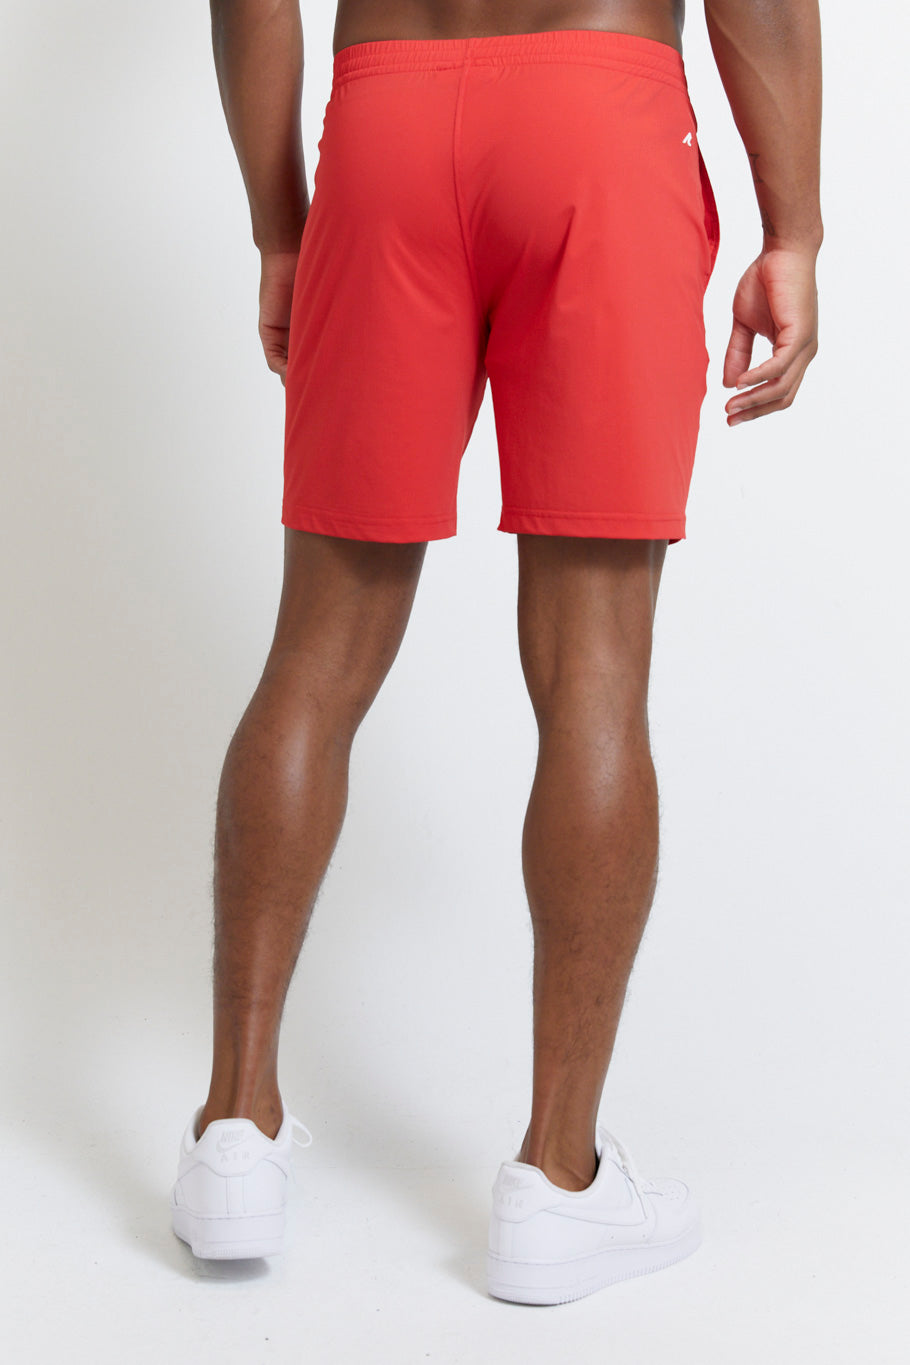 Image of the byron tennis short in rio